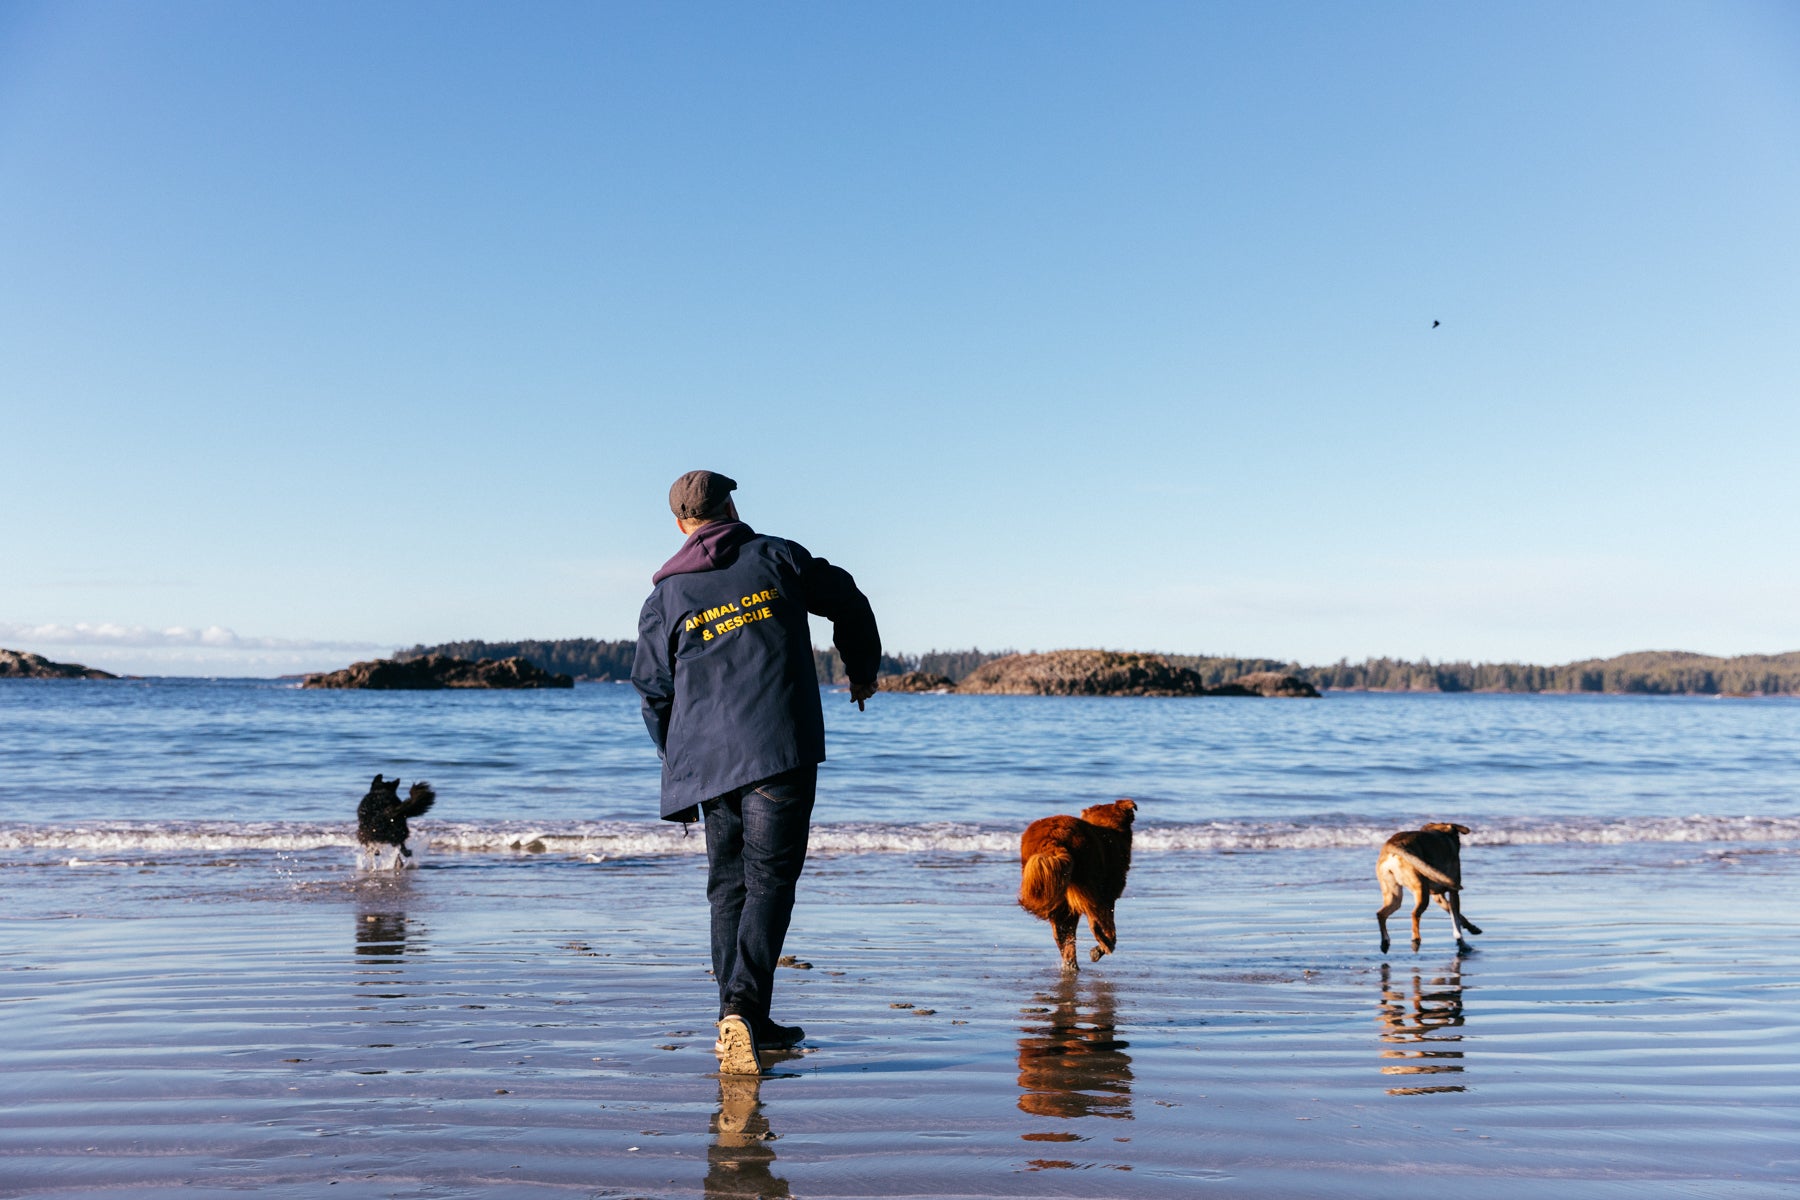 James Rodgers in a blue jacket with the wording “Animal Care & Rescue” on the back and jeans, plays fetch with three dogs on the beach. 